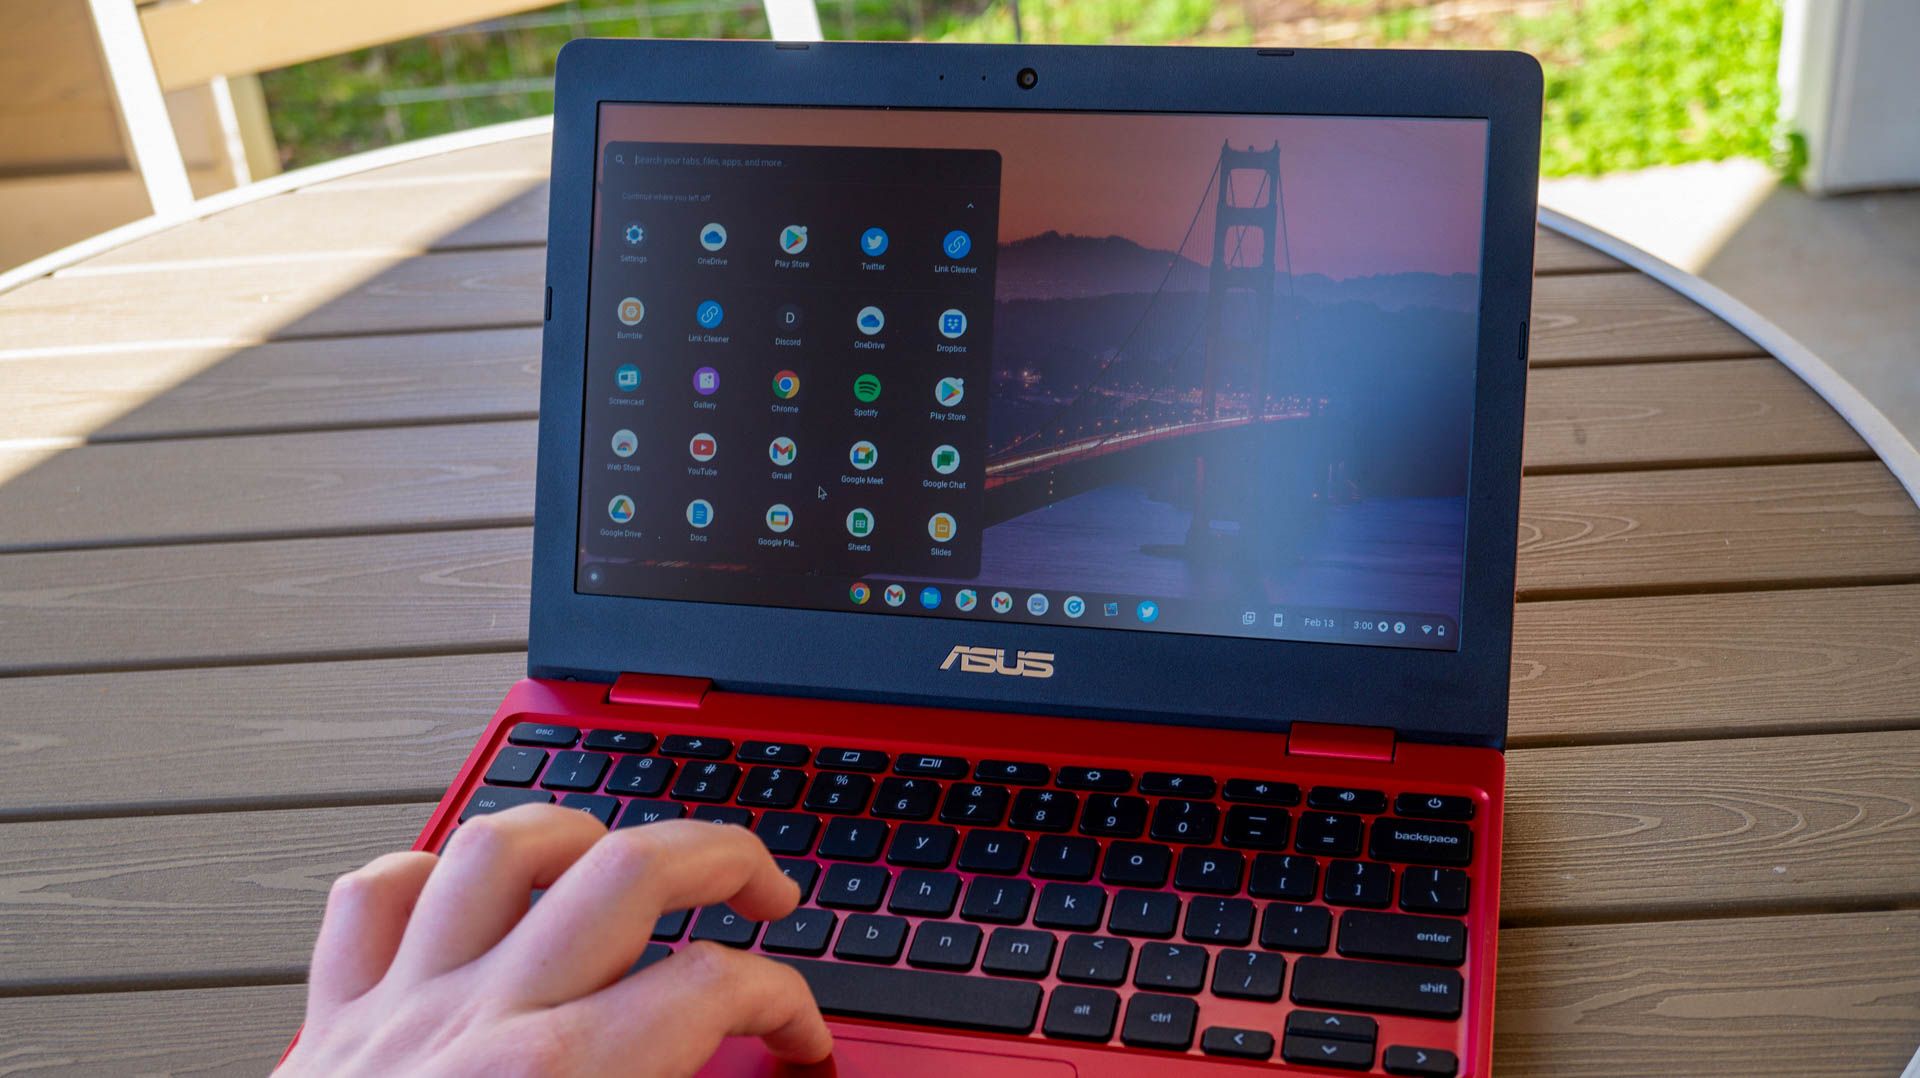 Using the ASUS Chromebook 12 on an outdoor table.